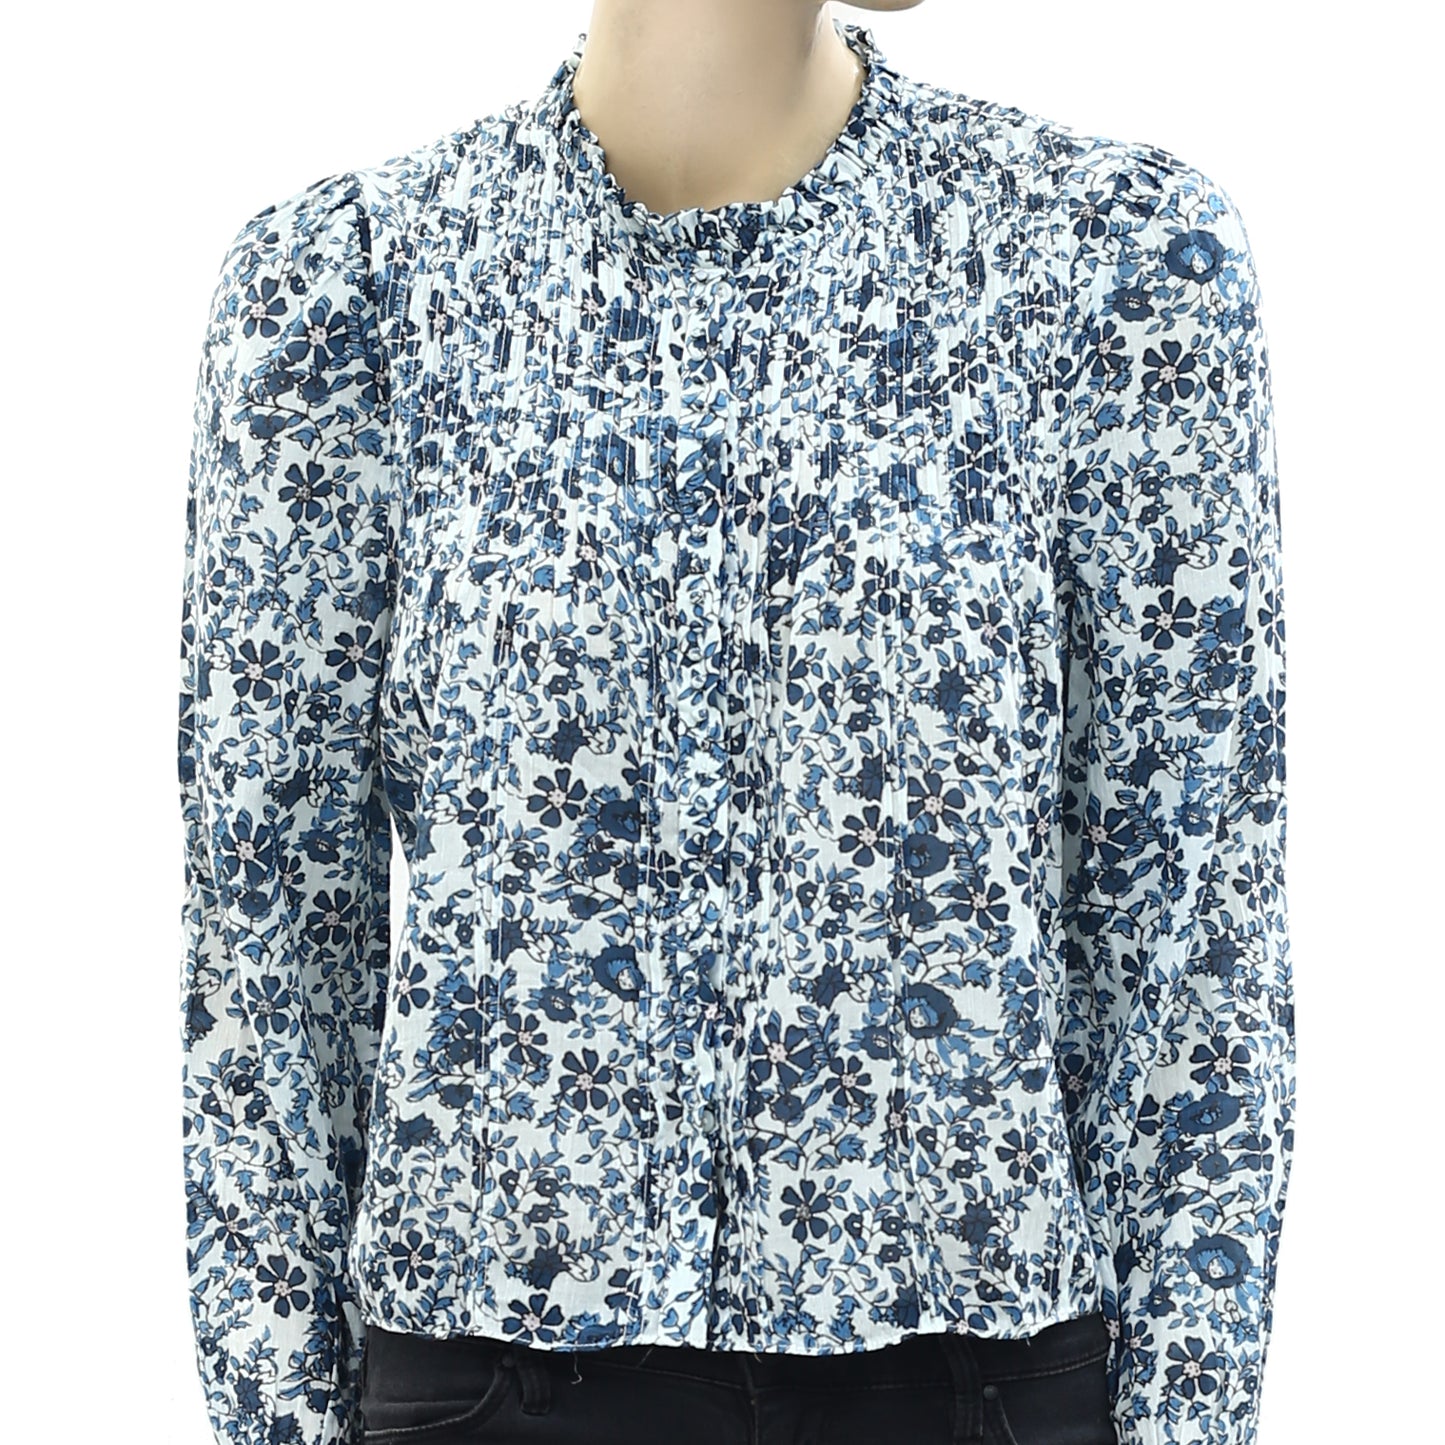 Doen Floral Printed Ruffle Blouse Top